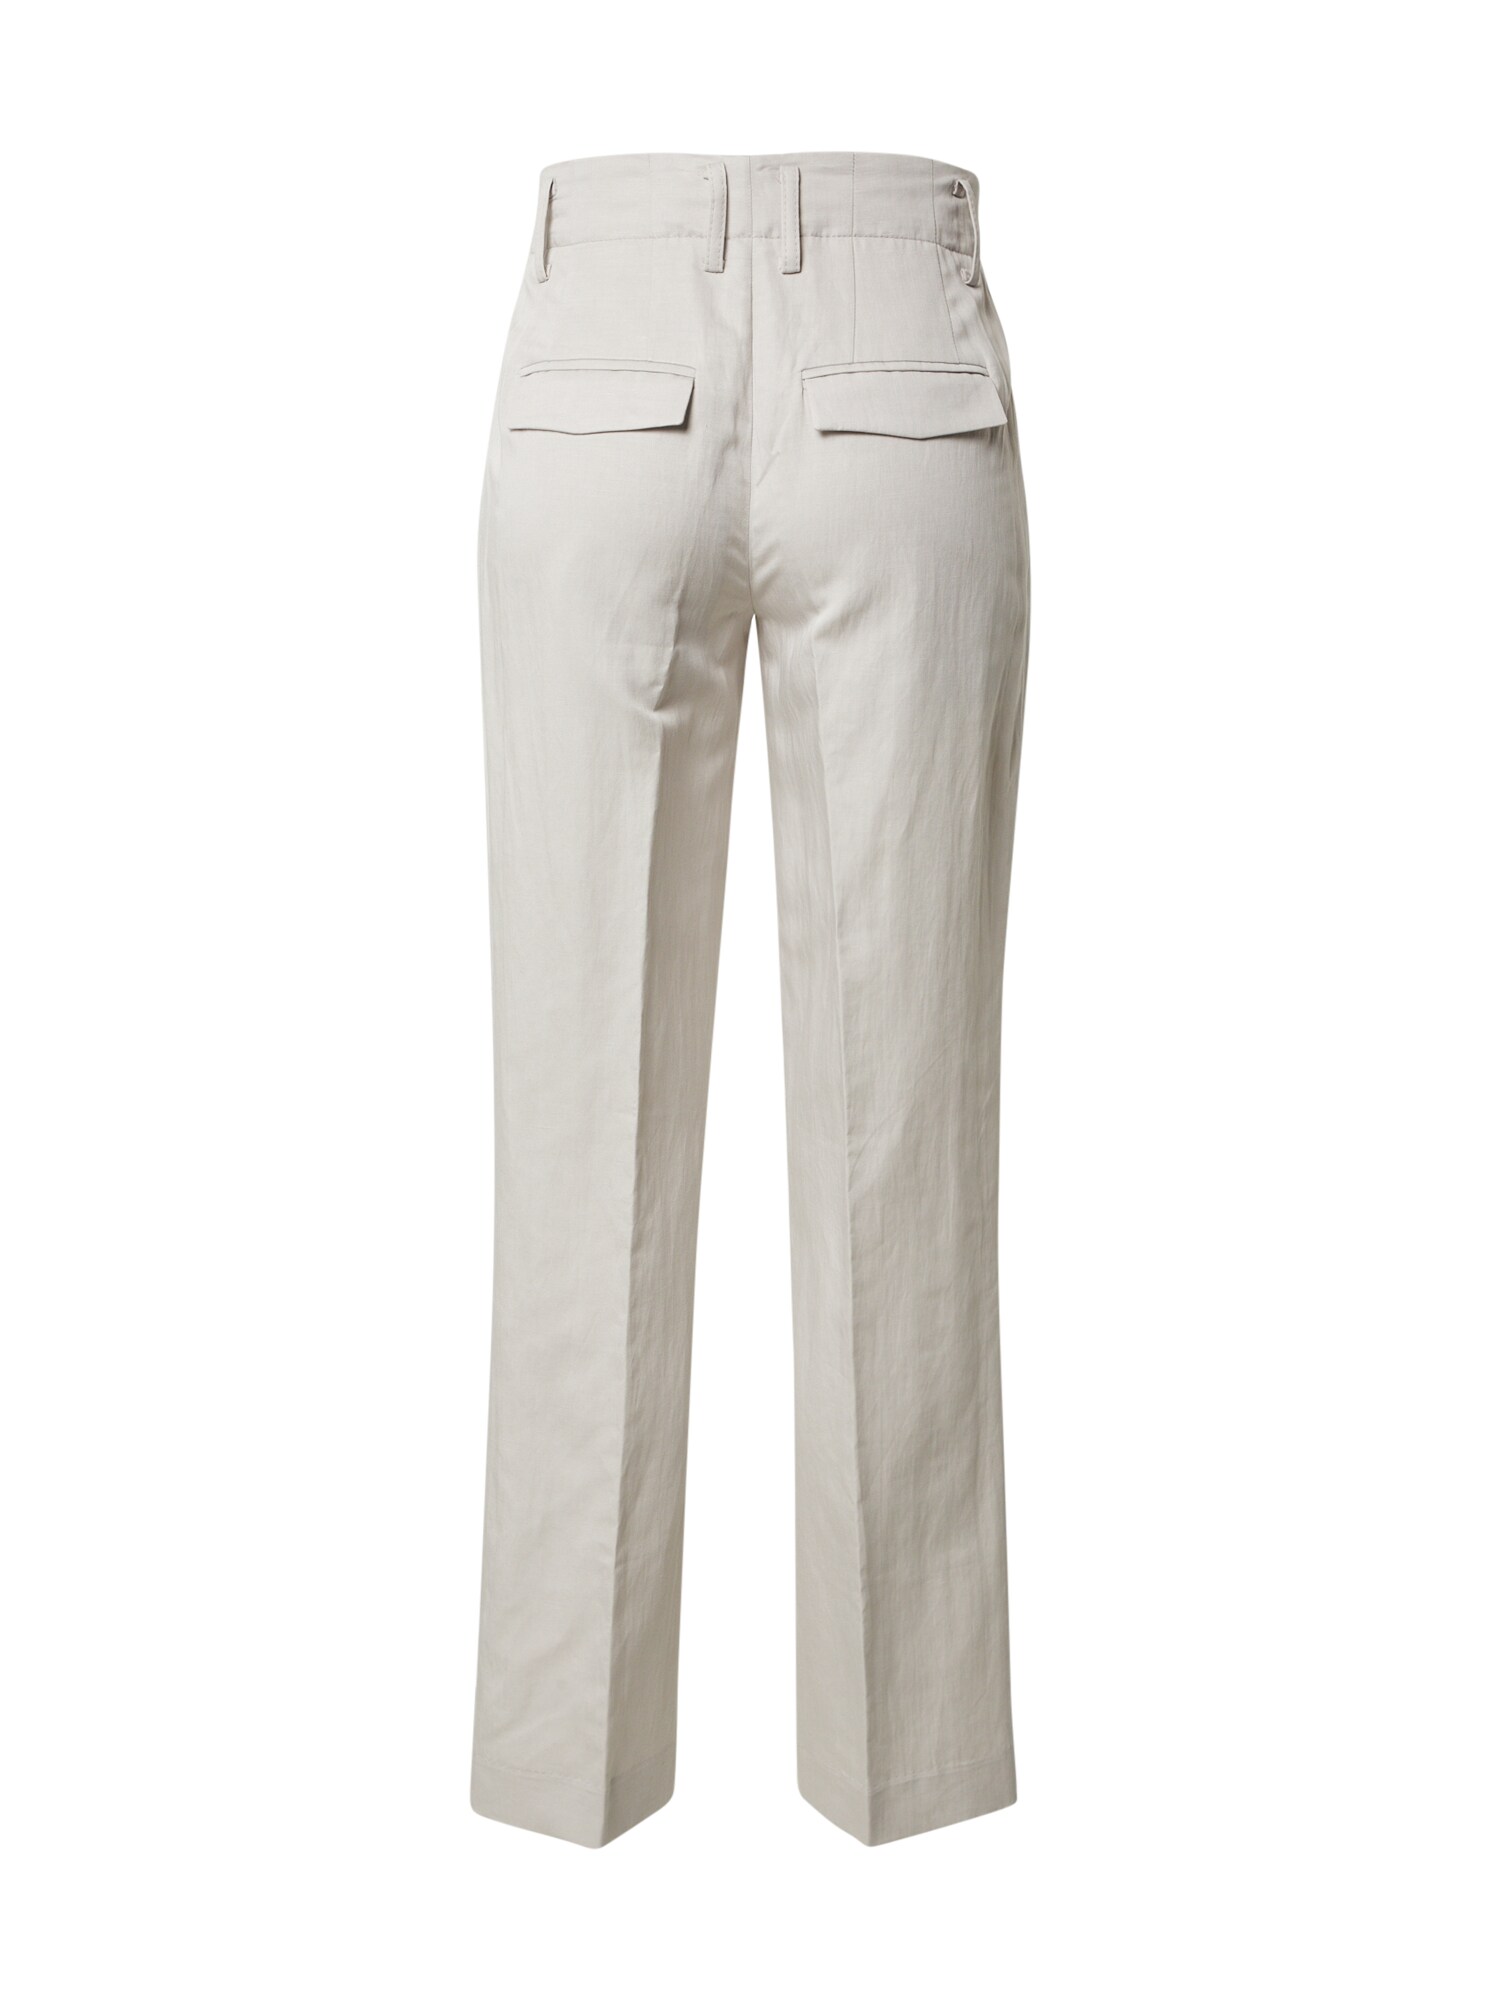 DRYKORN Trousers with creases 'GORGEOUS'  light beige